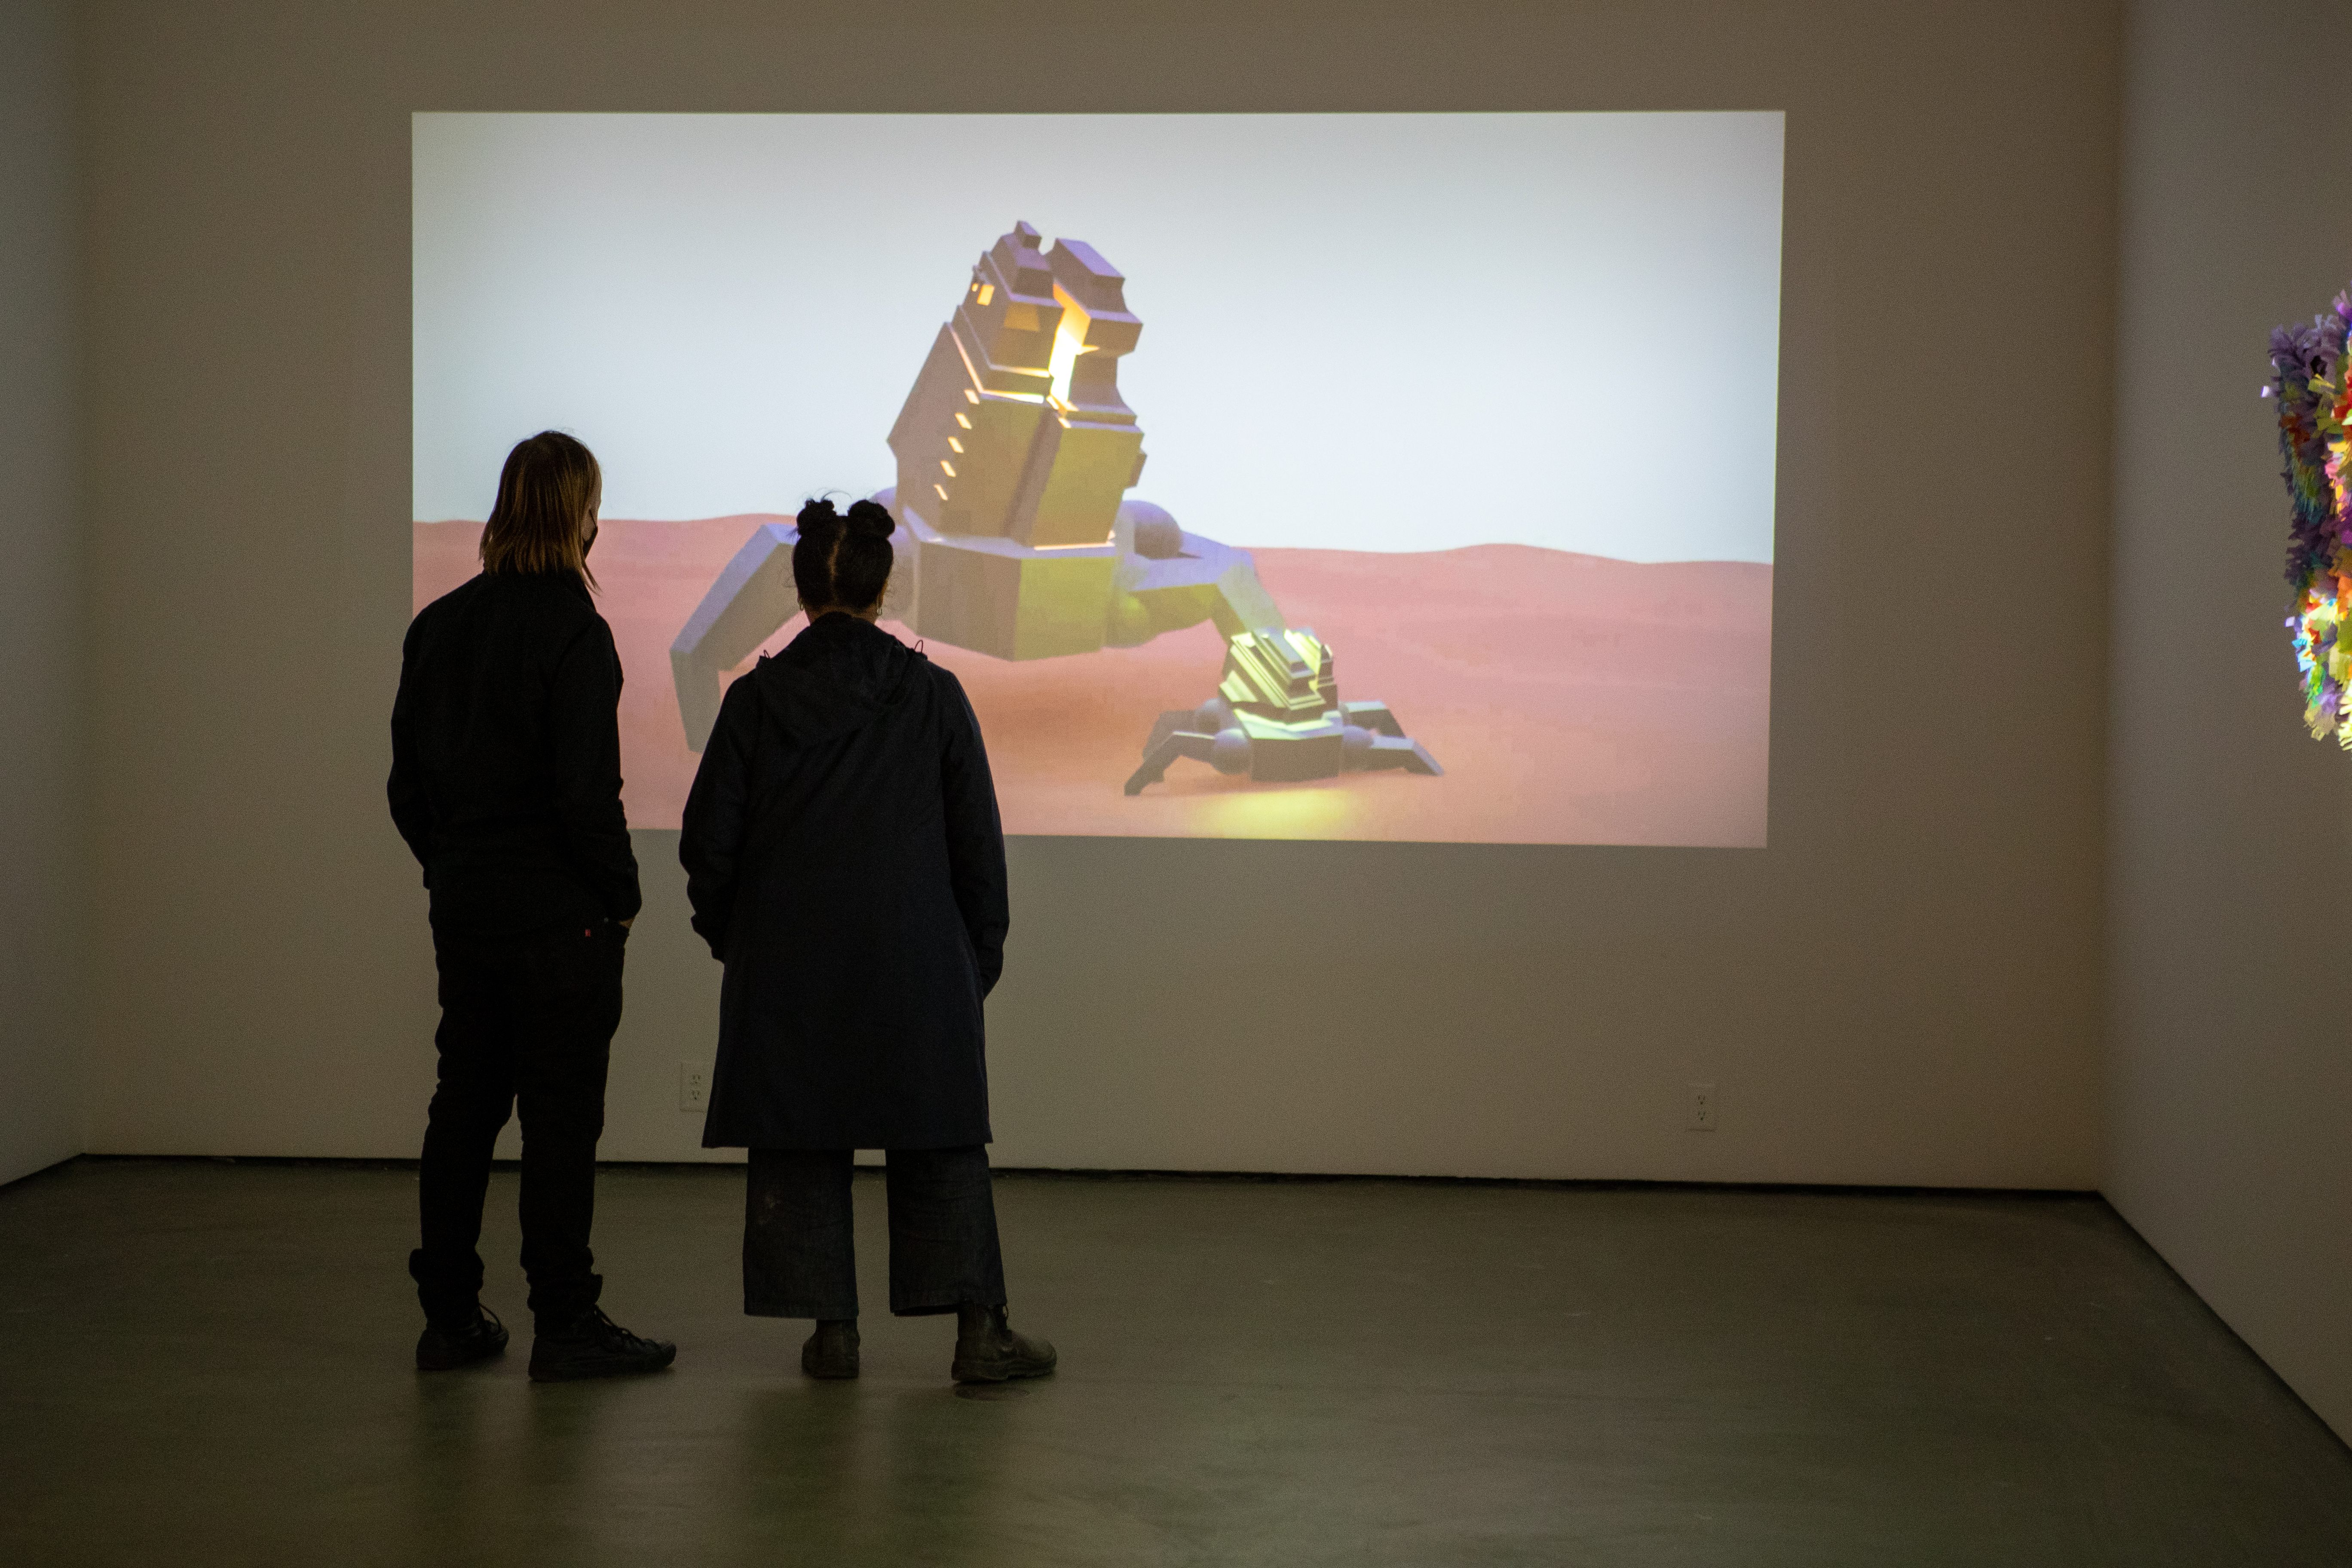 Two people looking at a video projected on the wall